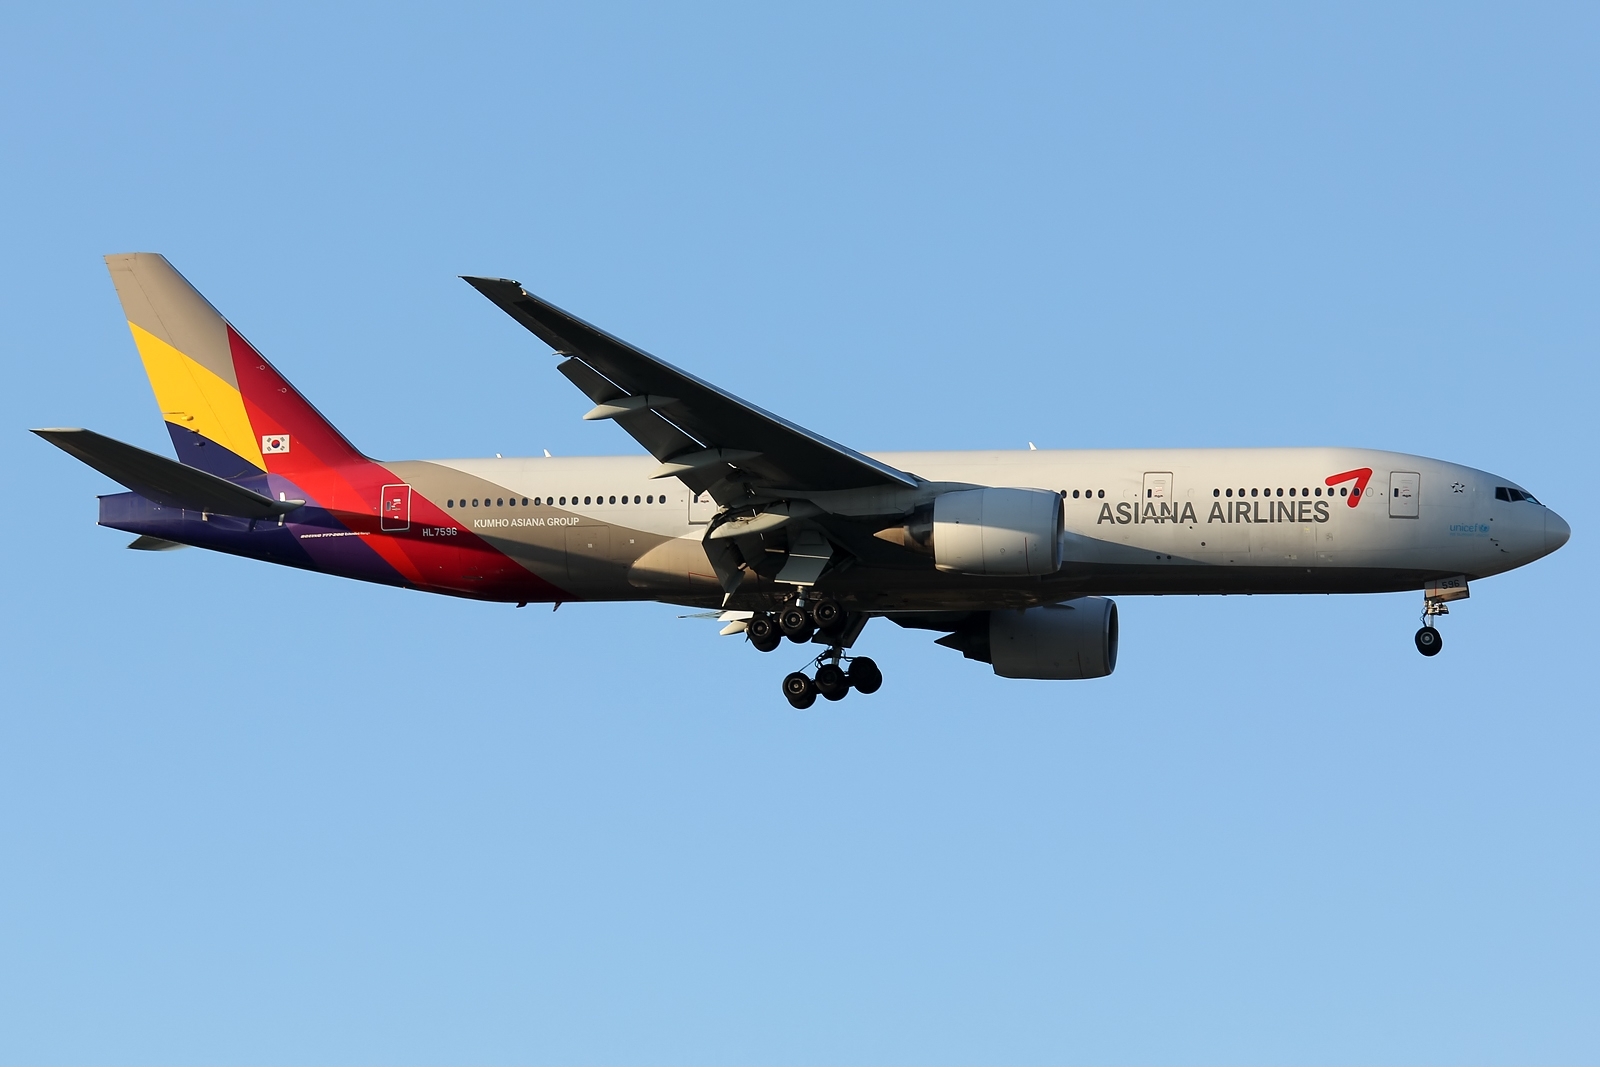 boeing 777 200 asiana 5 star airline Boeing 777 200 of Asiana Airlines ...